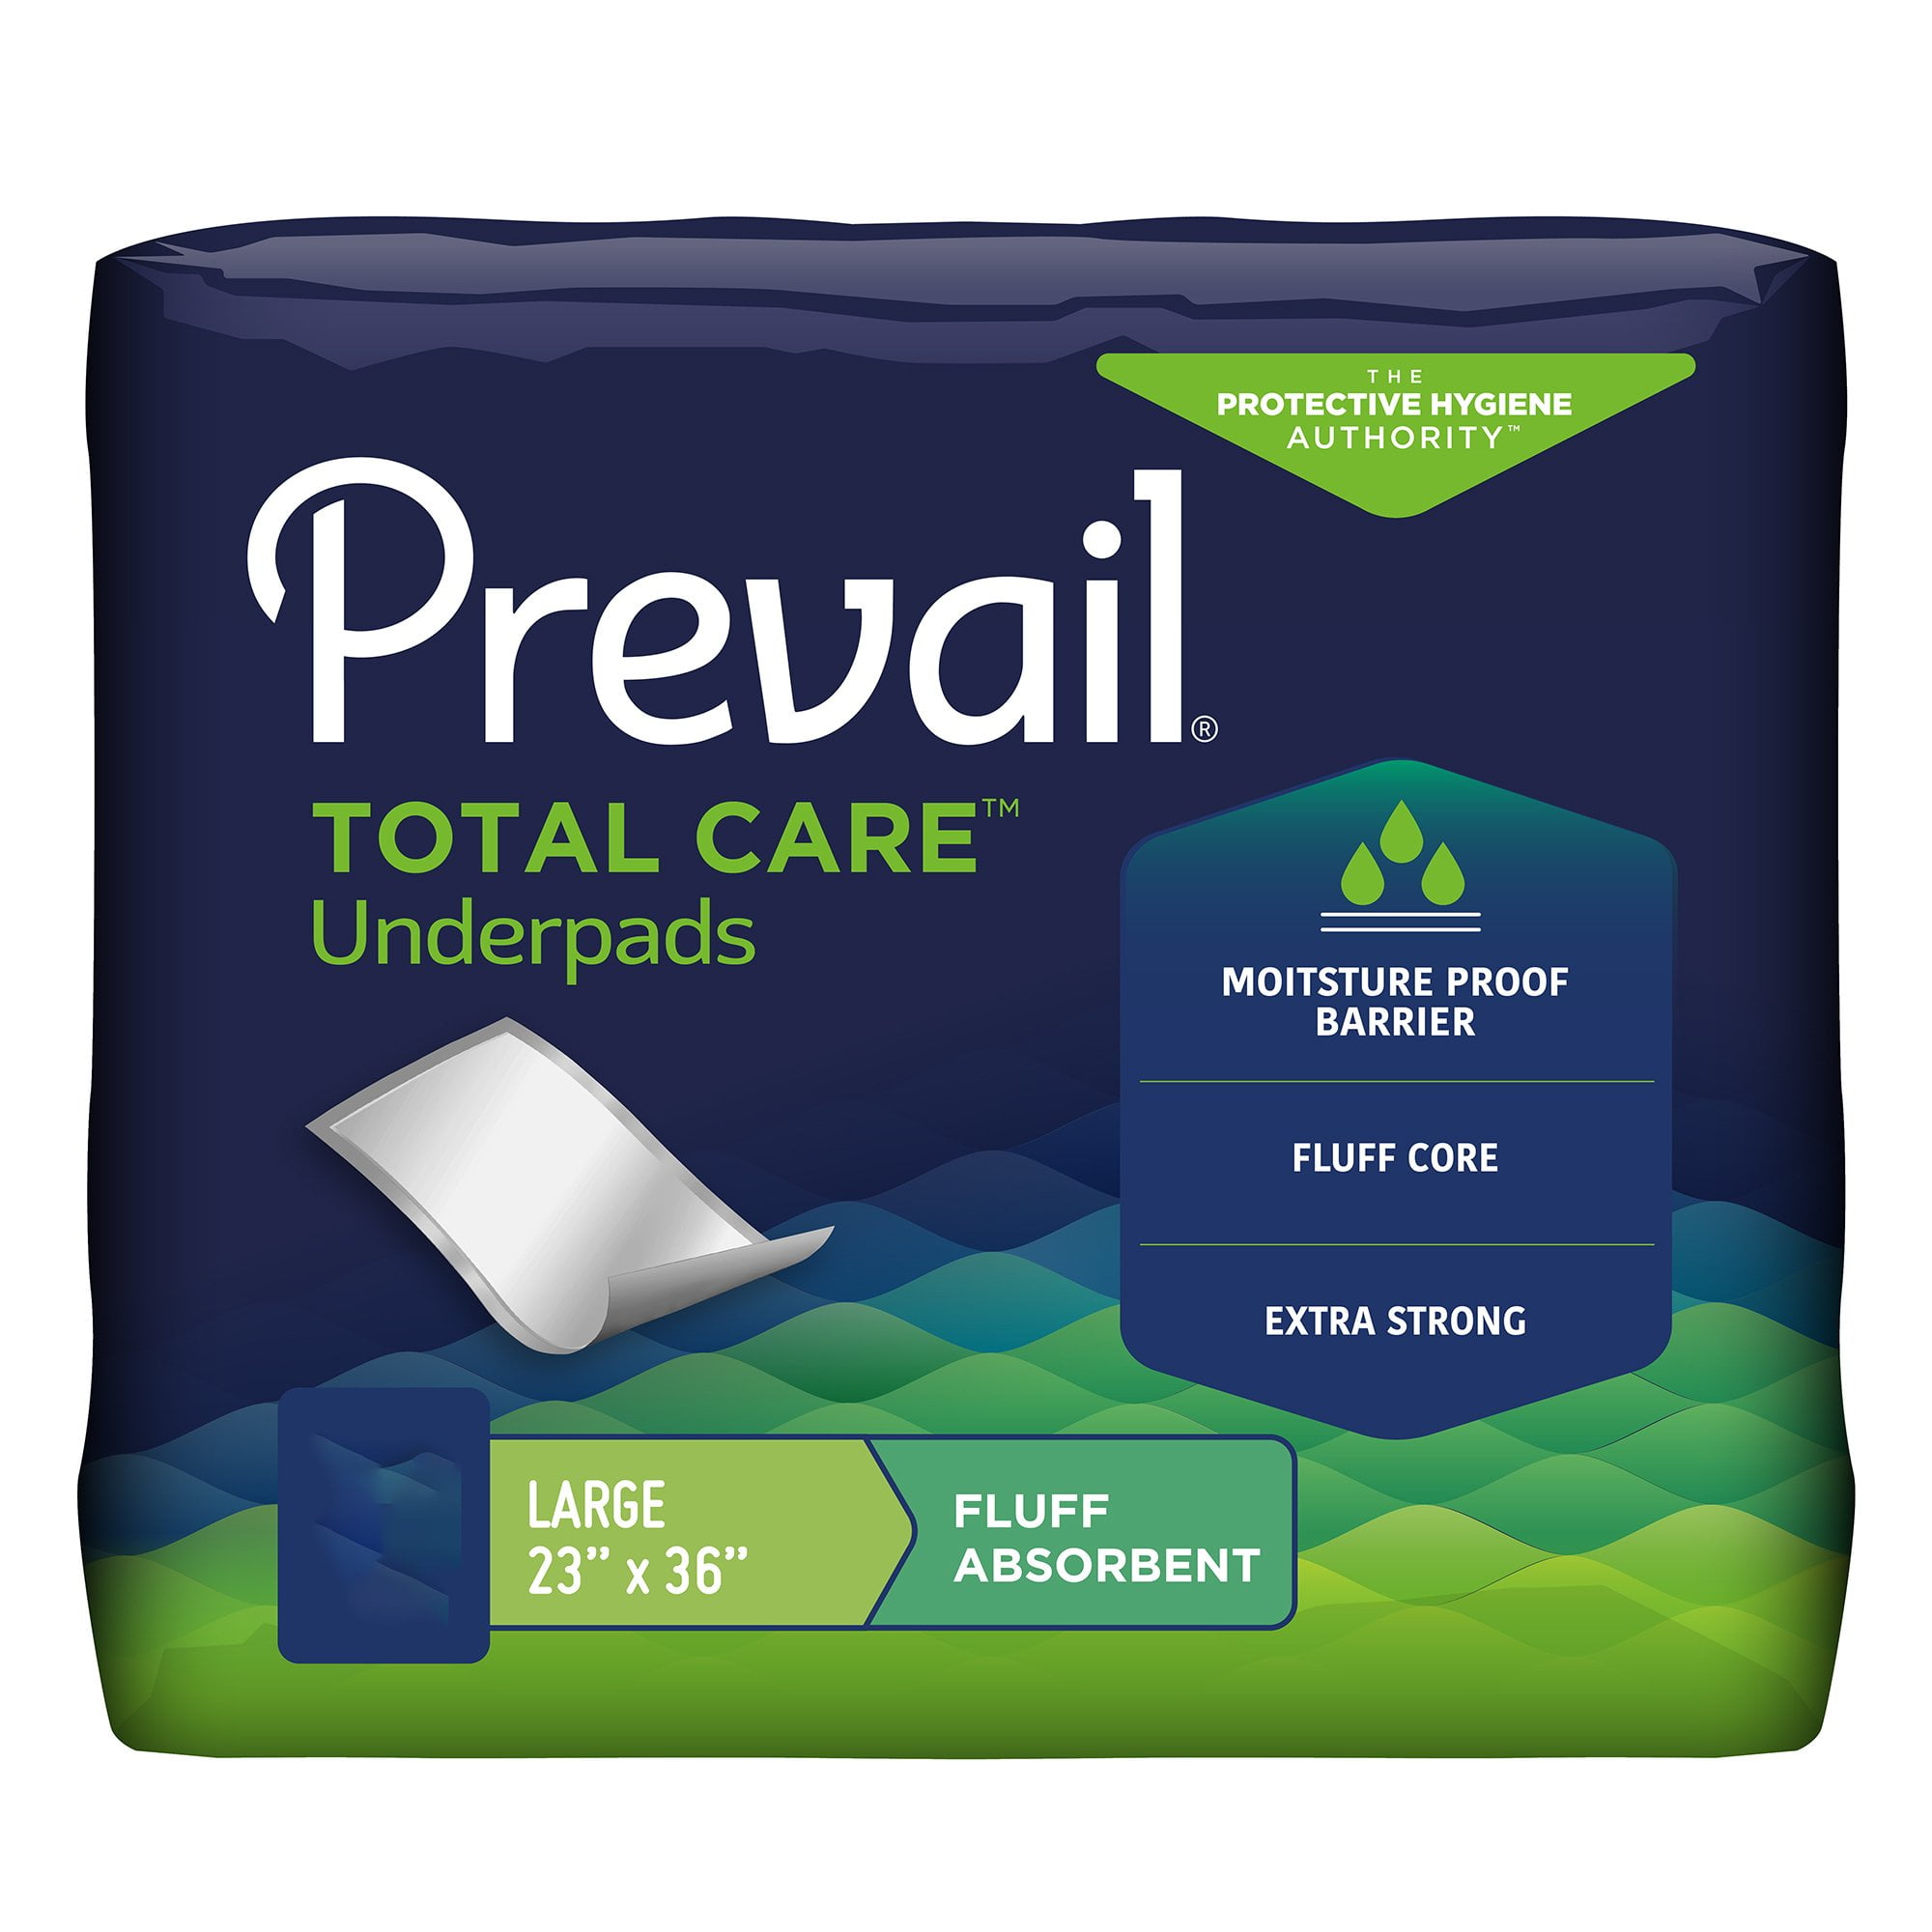 ProHeal (2 Pack) Reusable Underpads - Soft, Moisture Wicking